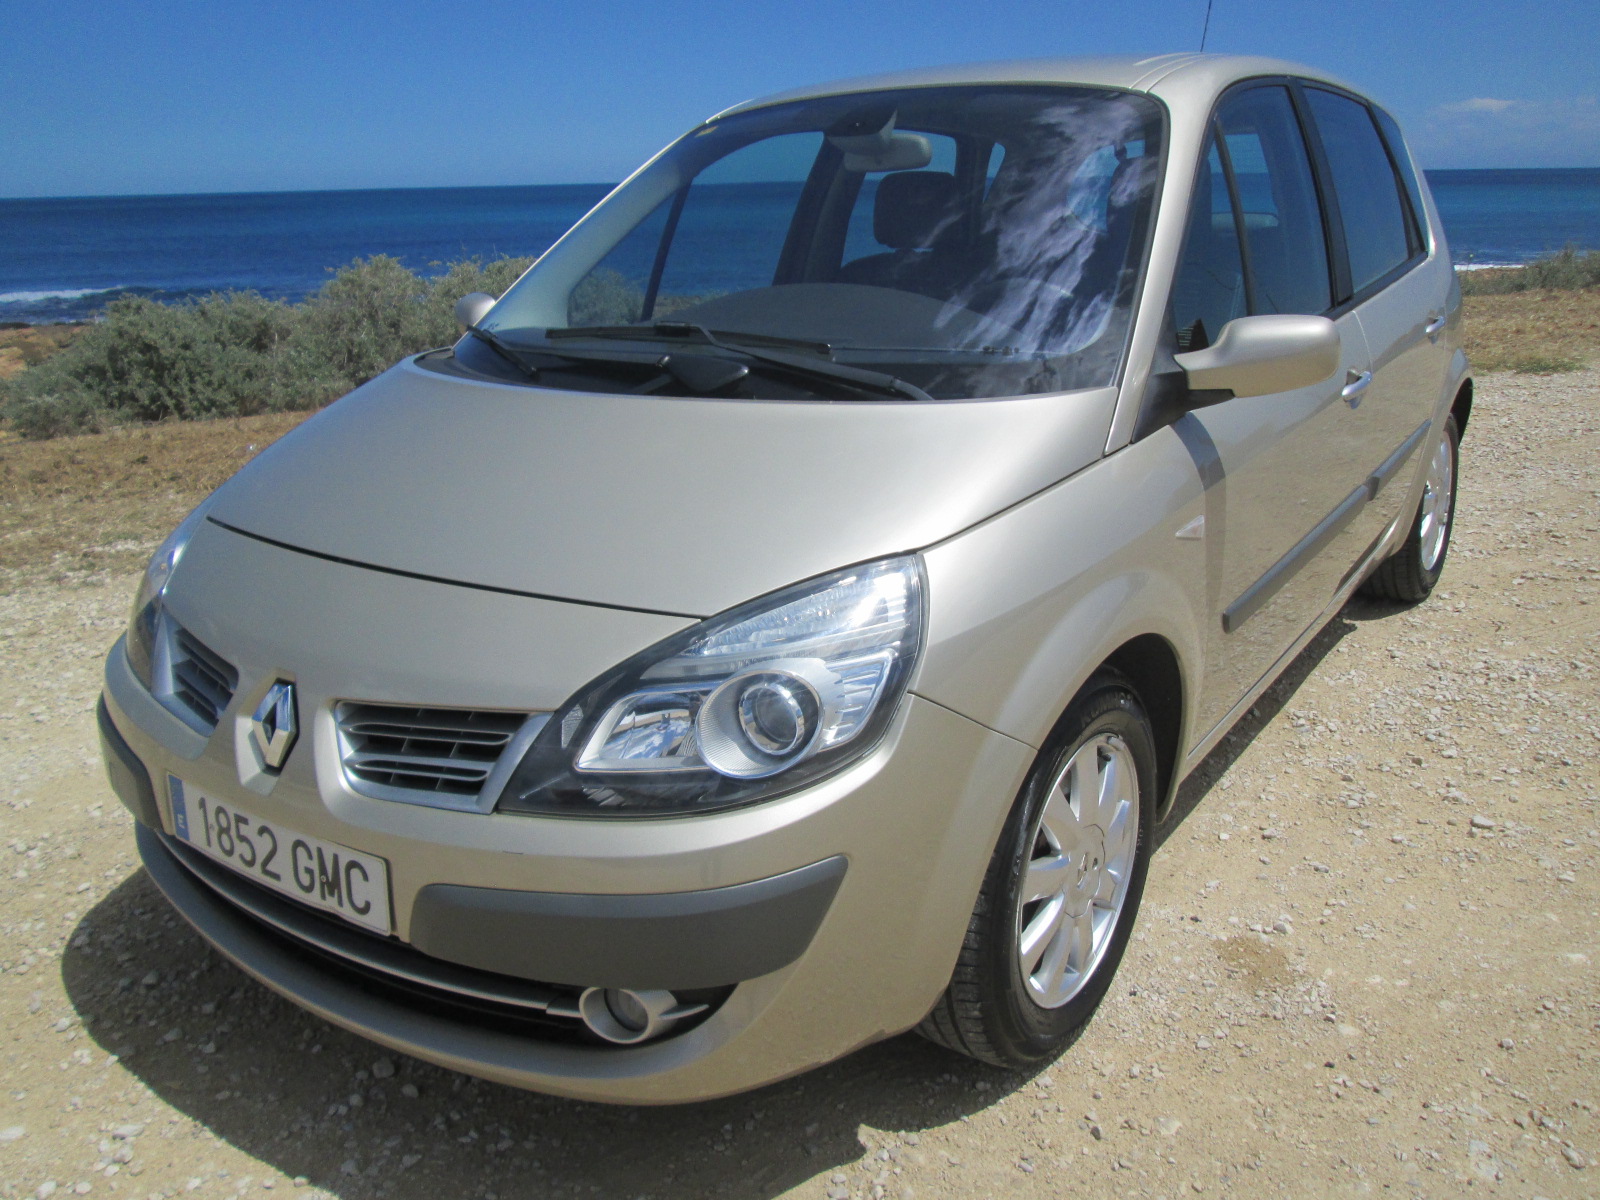 Renault Scenic 2.0 DCI Dynamique Automatic For Sale Mía Cars